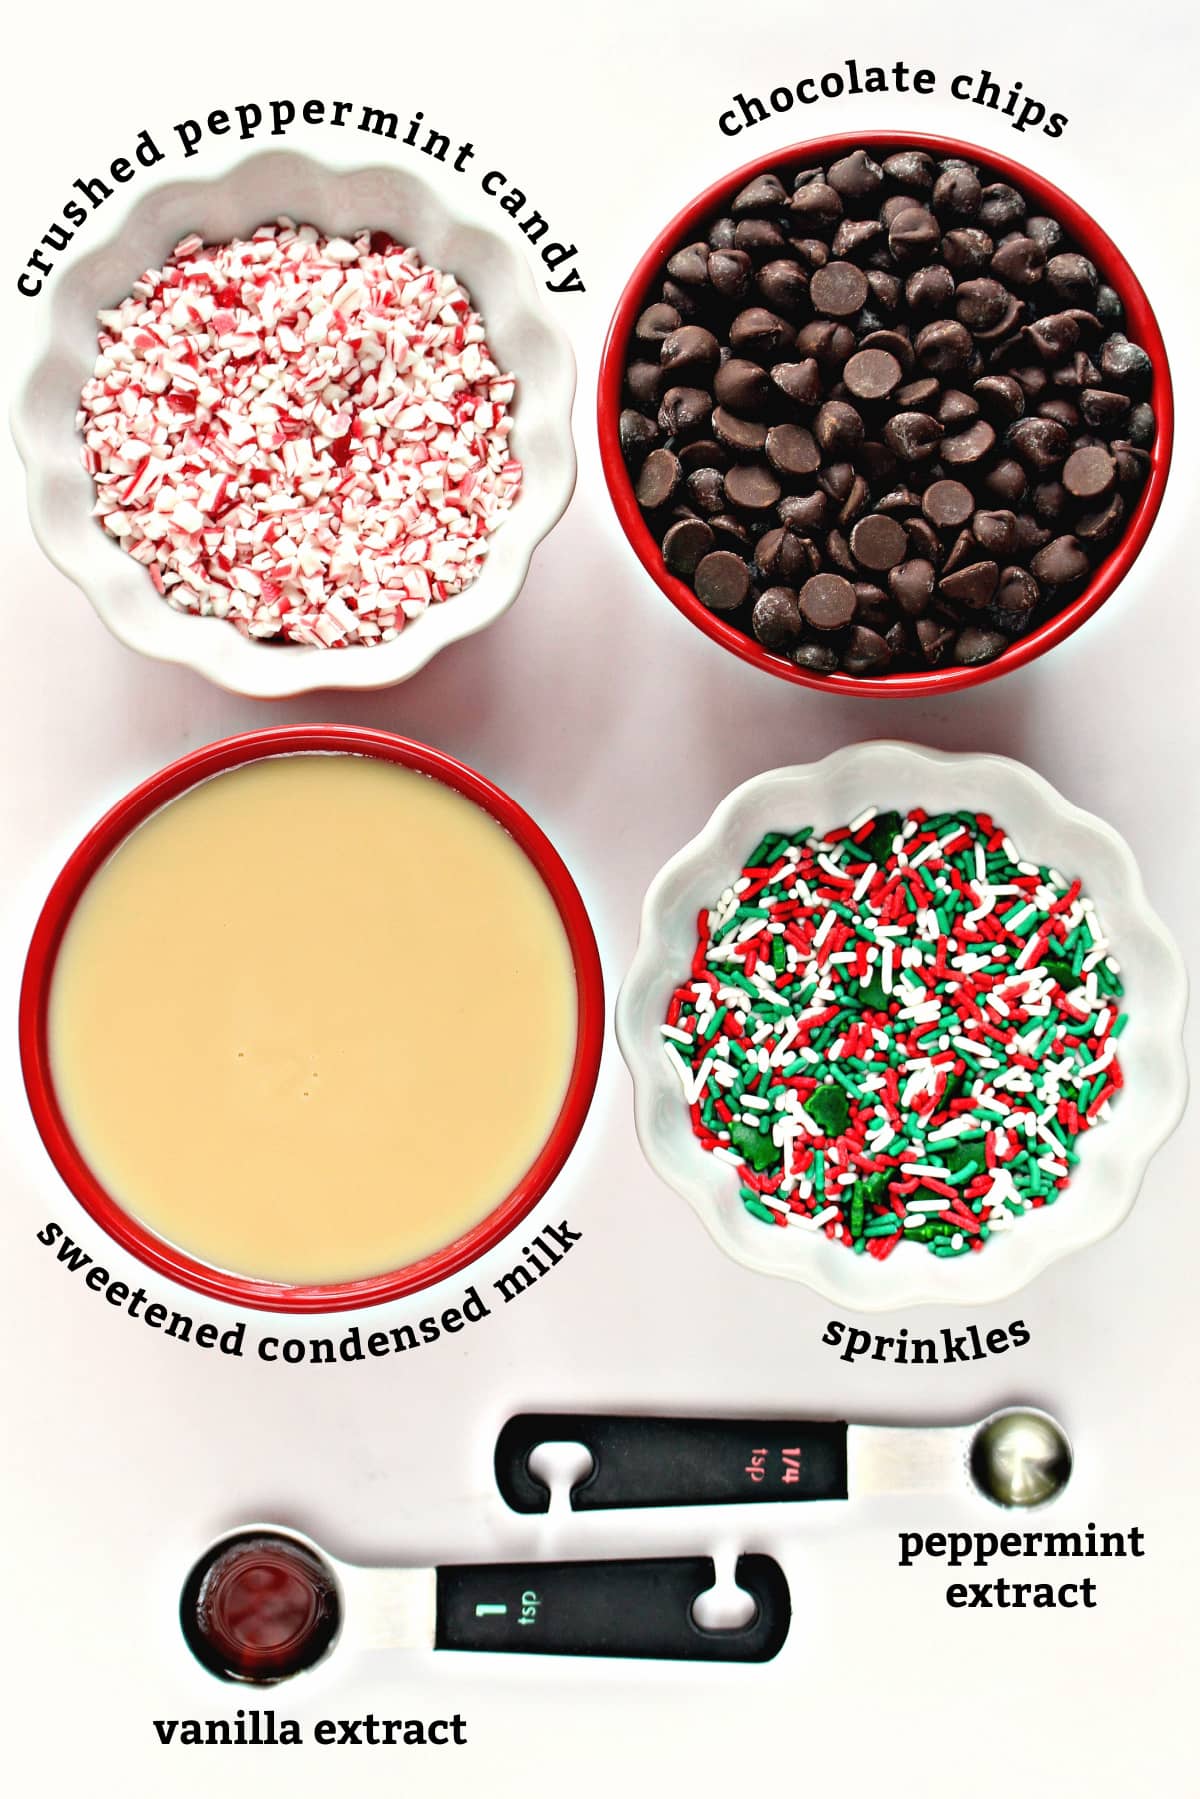 Peppermint Fudge ingredients collage with text labels for crushed peppermint candy, chocolate chips, condensed milk, sprinkles.